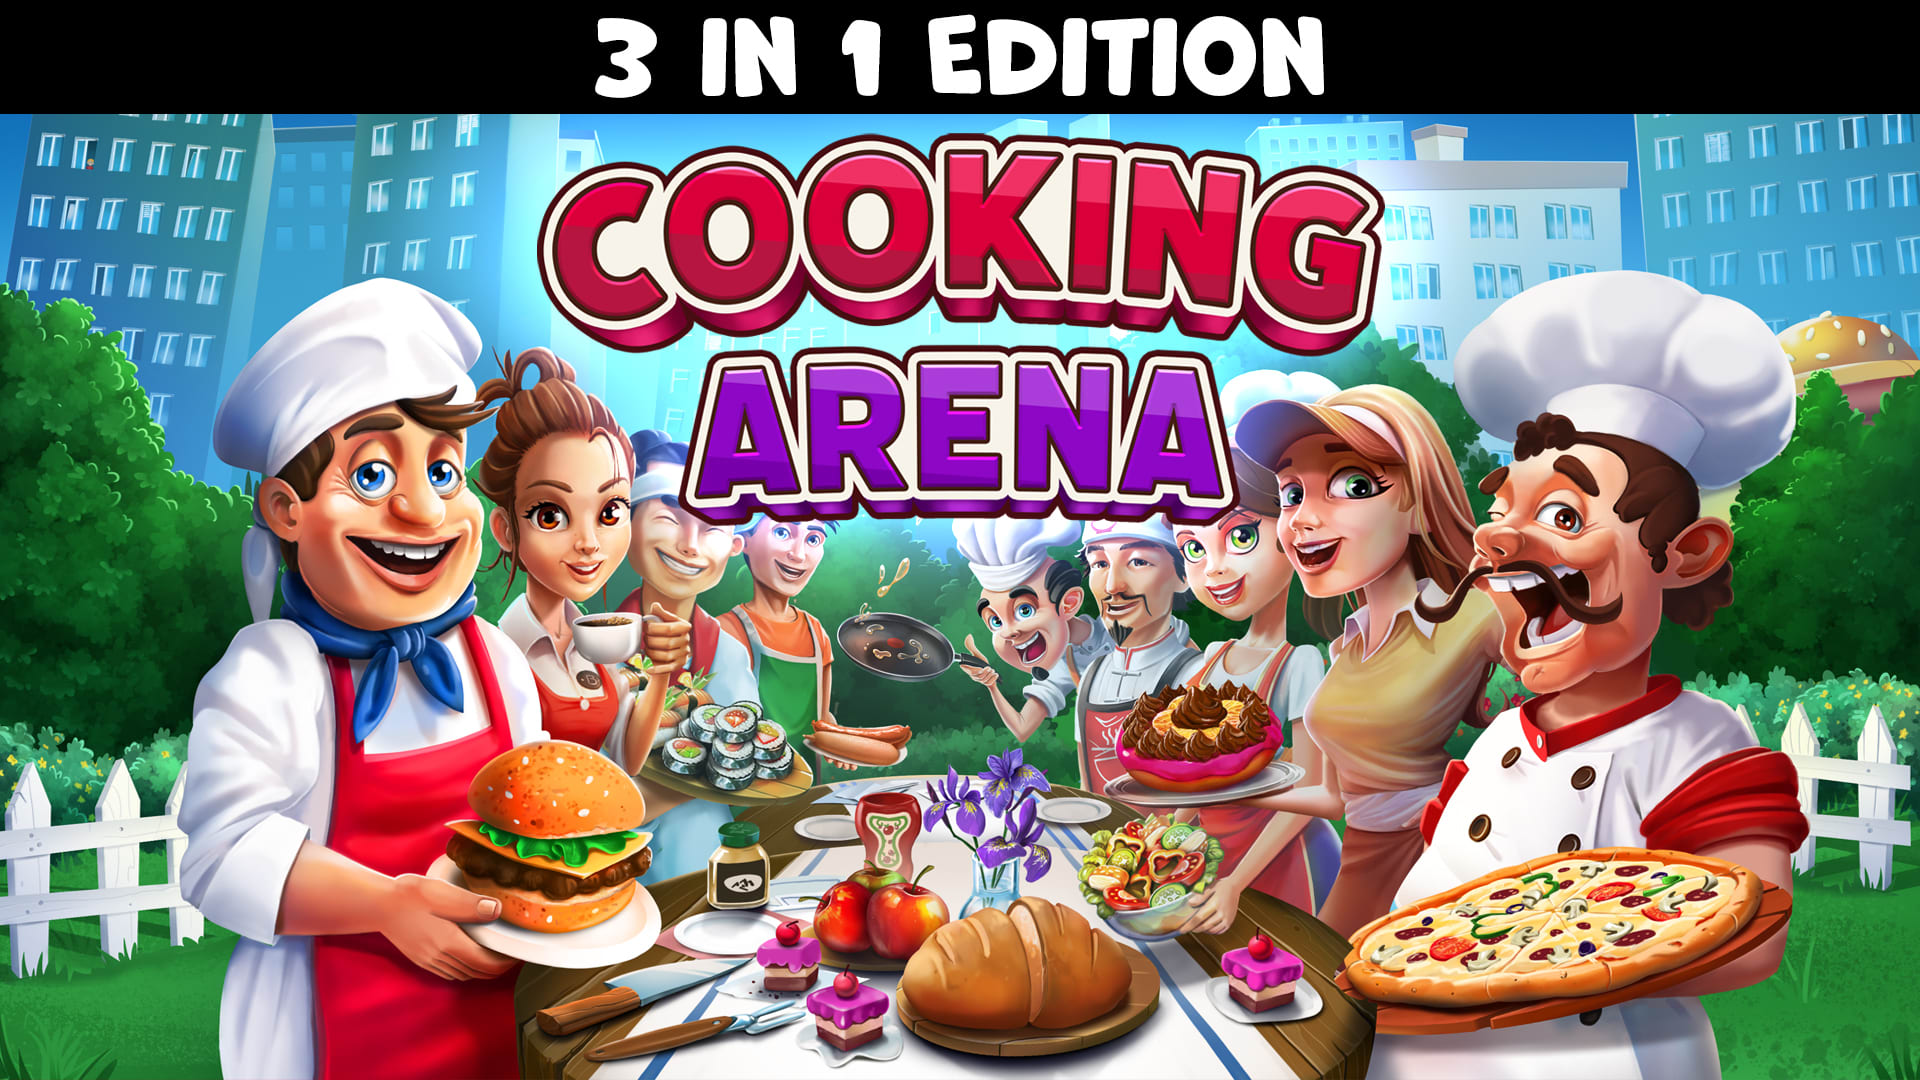 Cooking Arena - 3 in 1 Edition